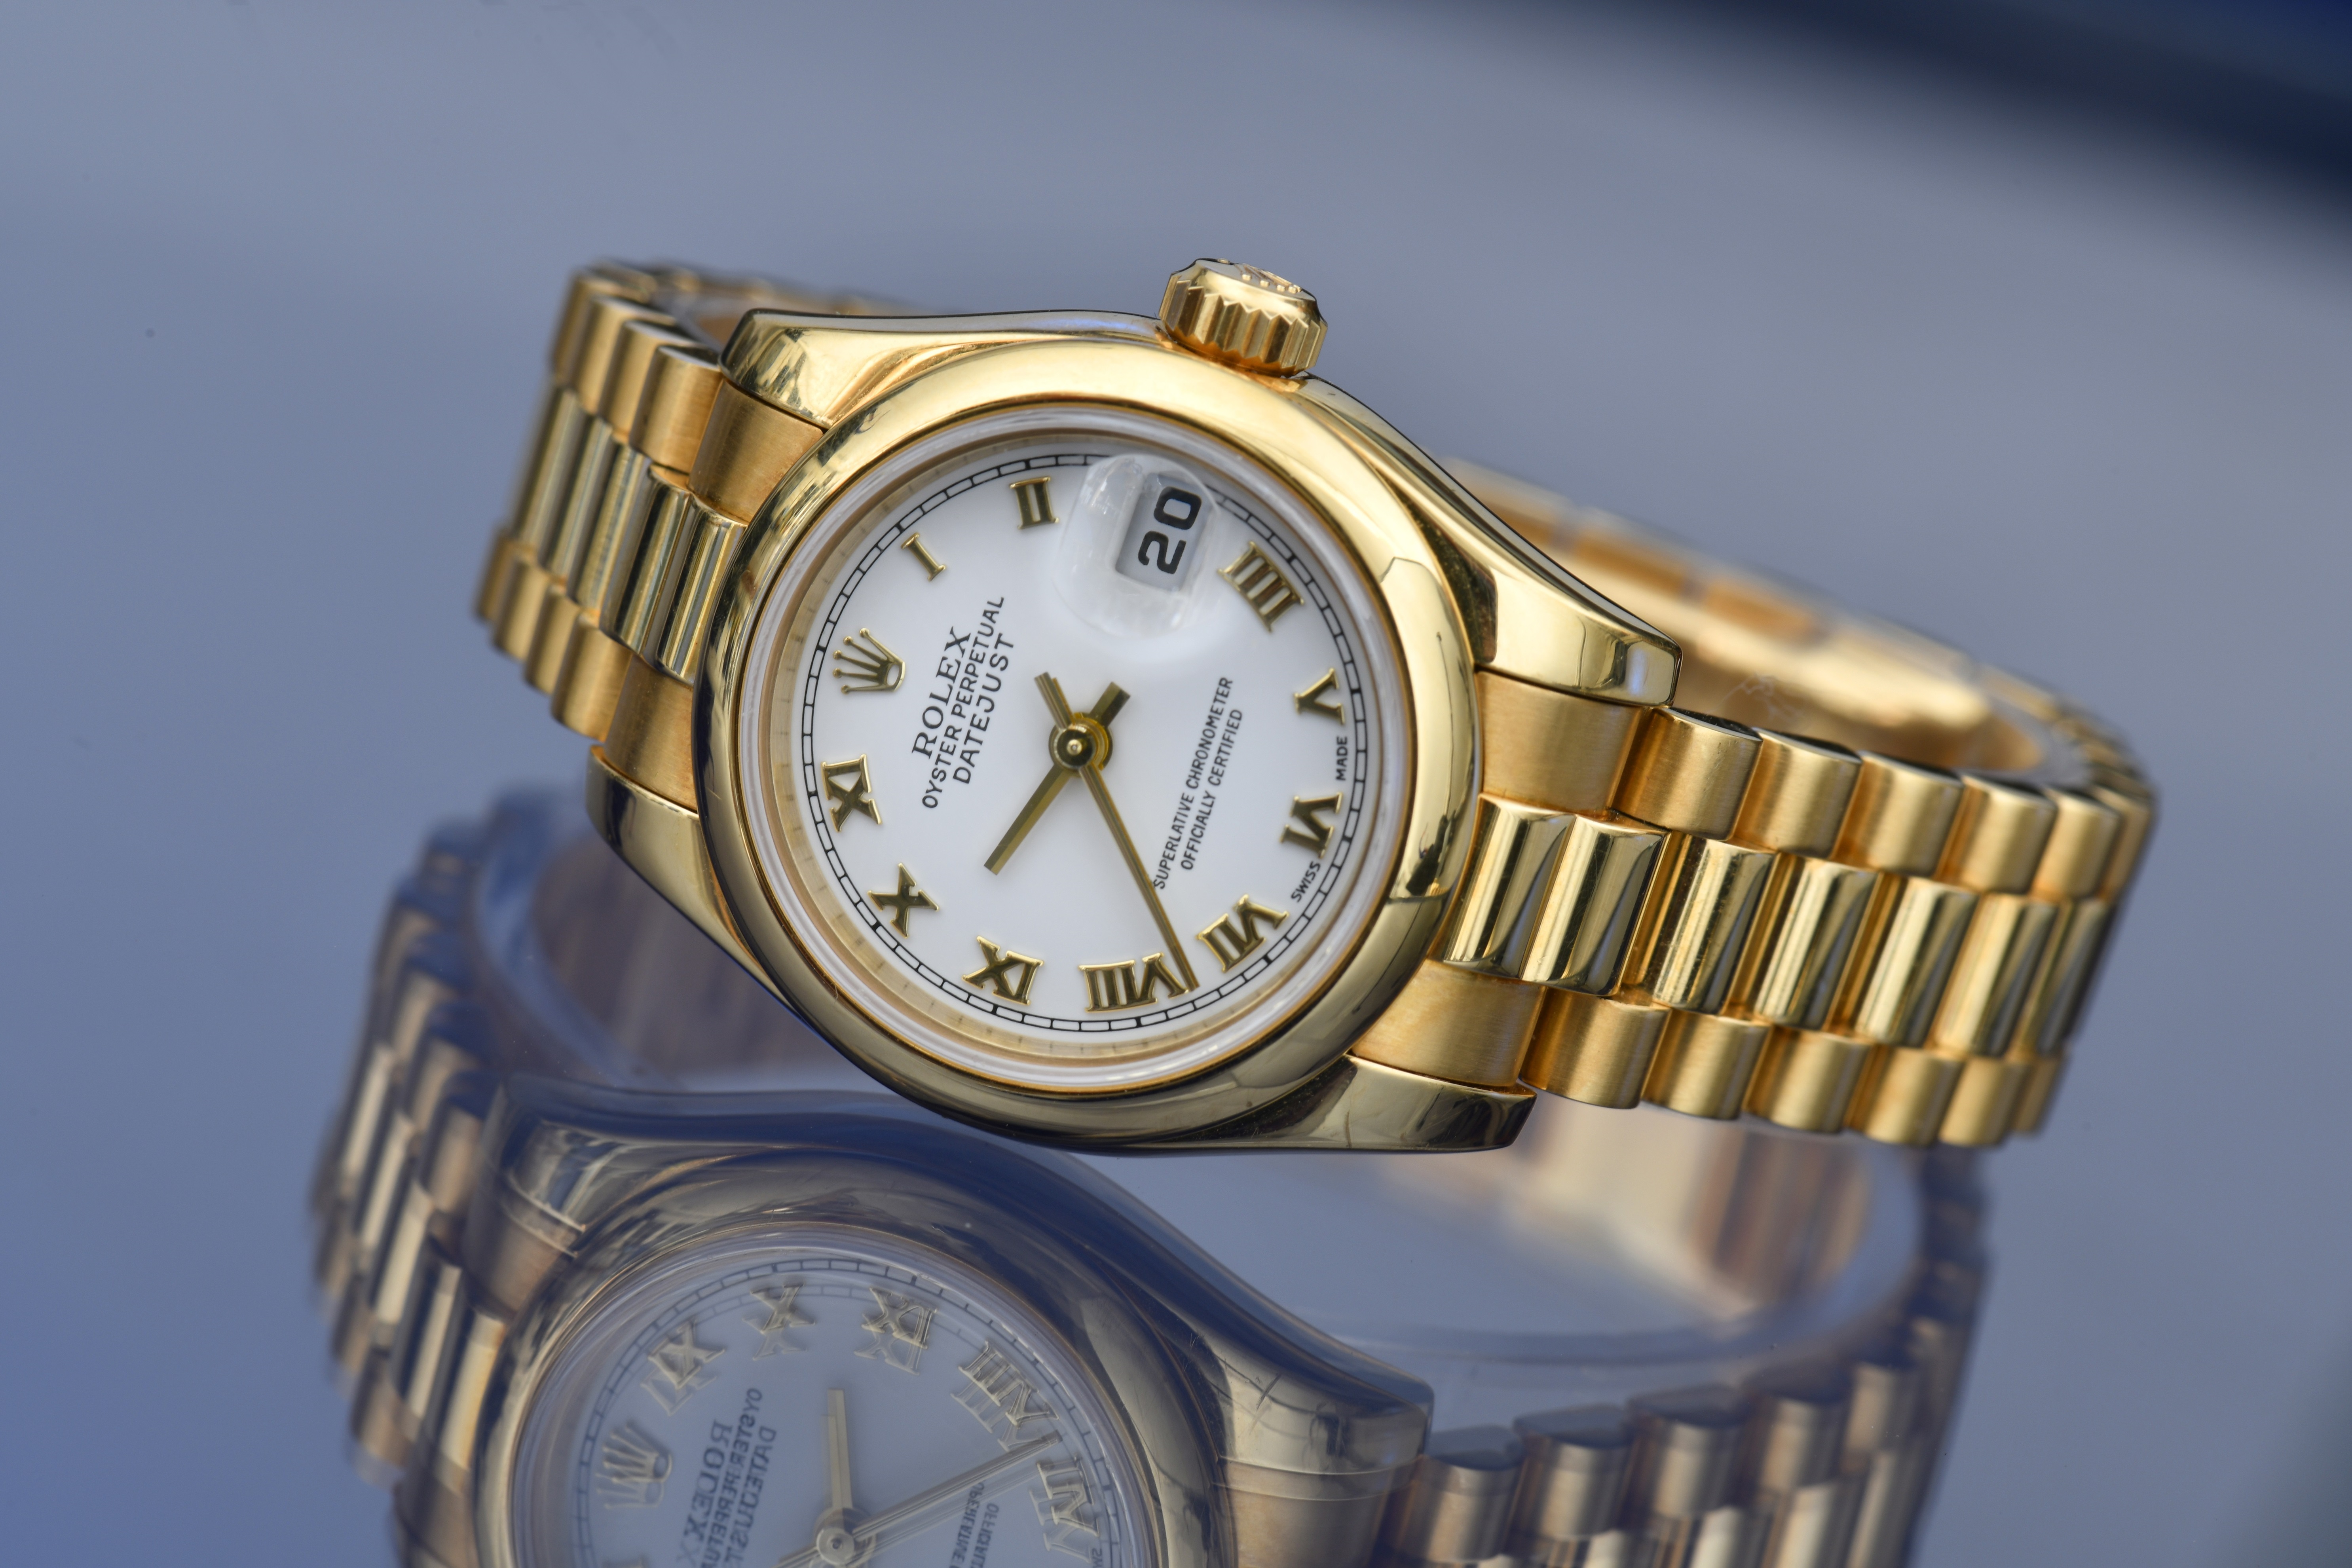 Rolex Oyster Perpetual Datejust 18ct gold ladies automatic wristwatch ref. 179168 with date - Image 8 of 8